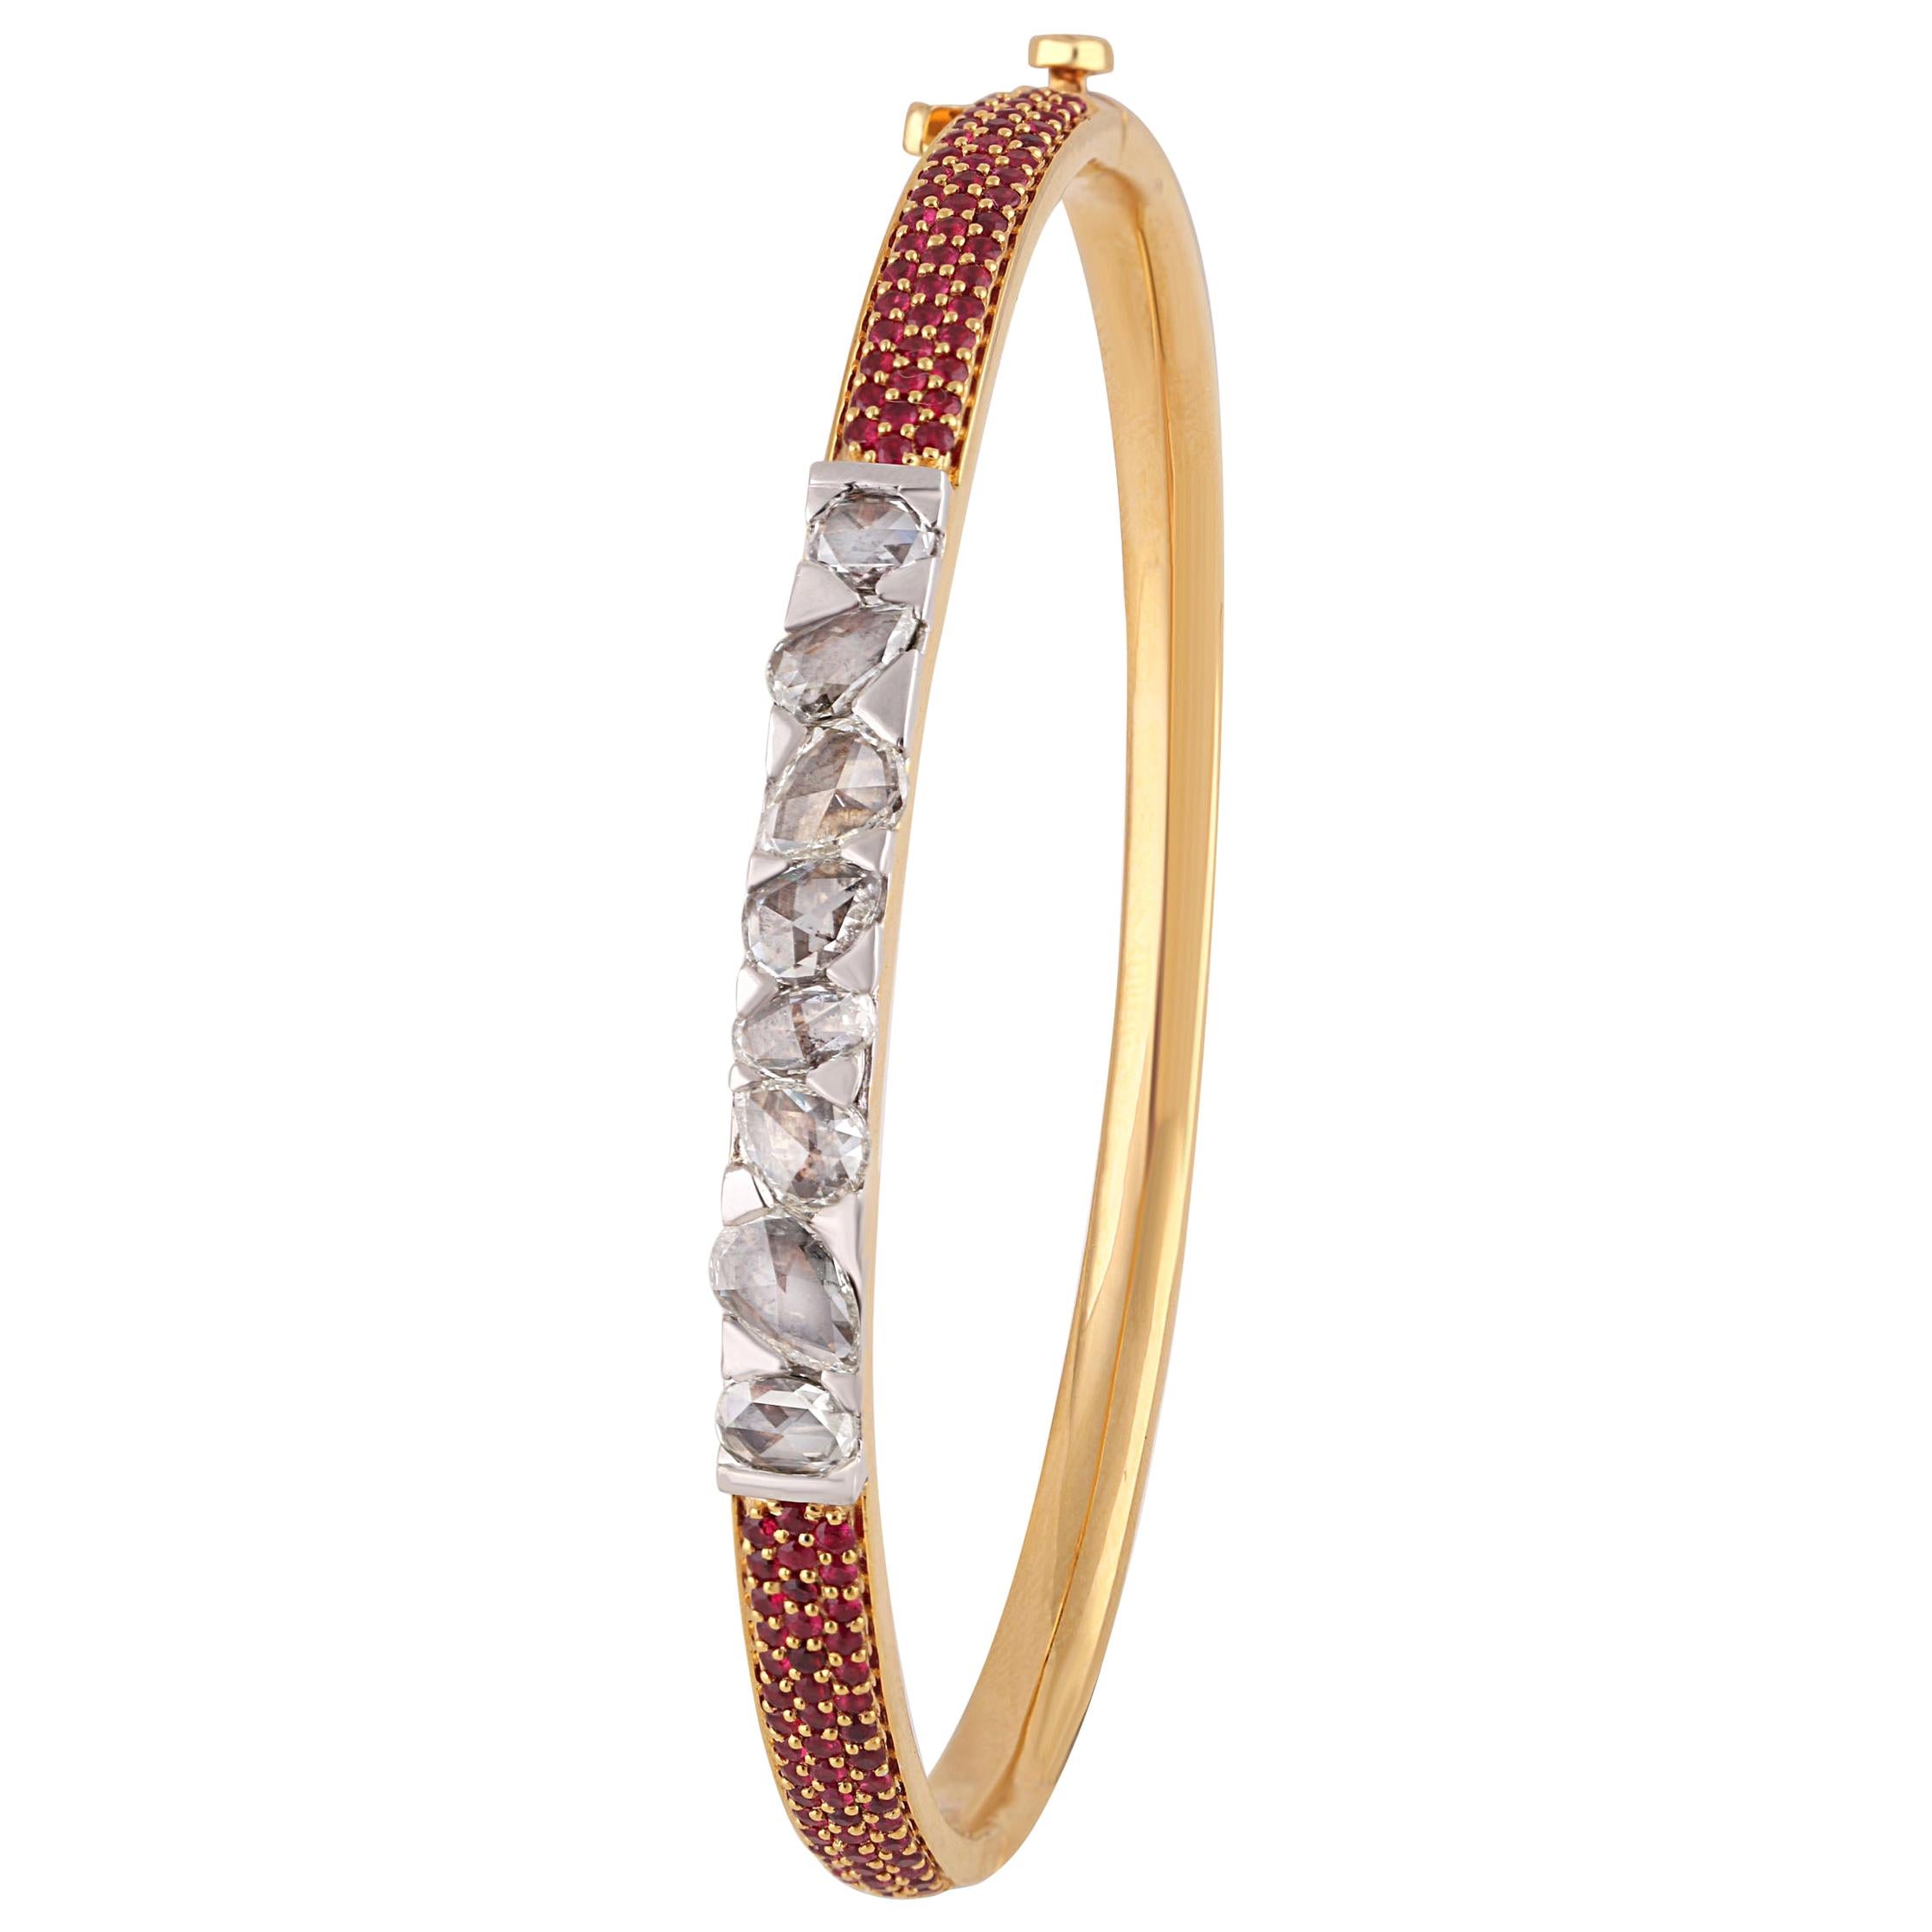 Gross Weight: 17.18 Grams
Diamond Weight: 1.63 cts
Ruby Weight: 1.04 cts
Bracelet Size: 56.20 MM X 45.70 MM
IGI Certification can be done on Request.

Video of the product can be shared on request.

Exemplifying the charm of simplicity, is this 18